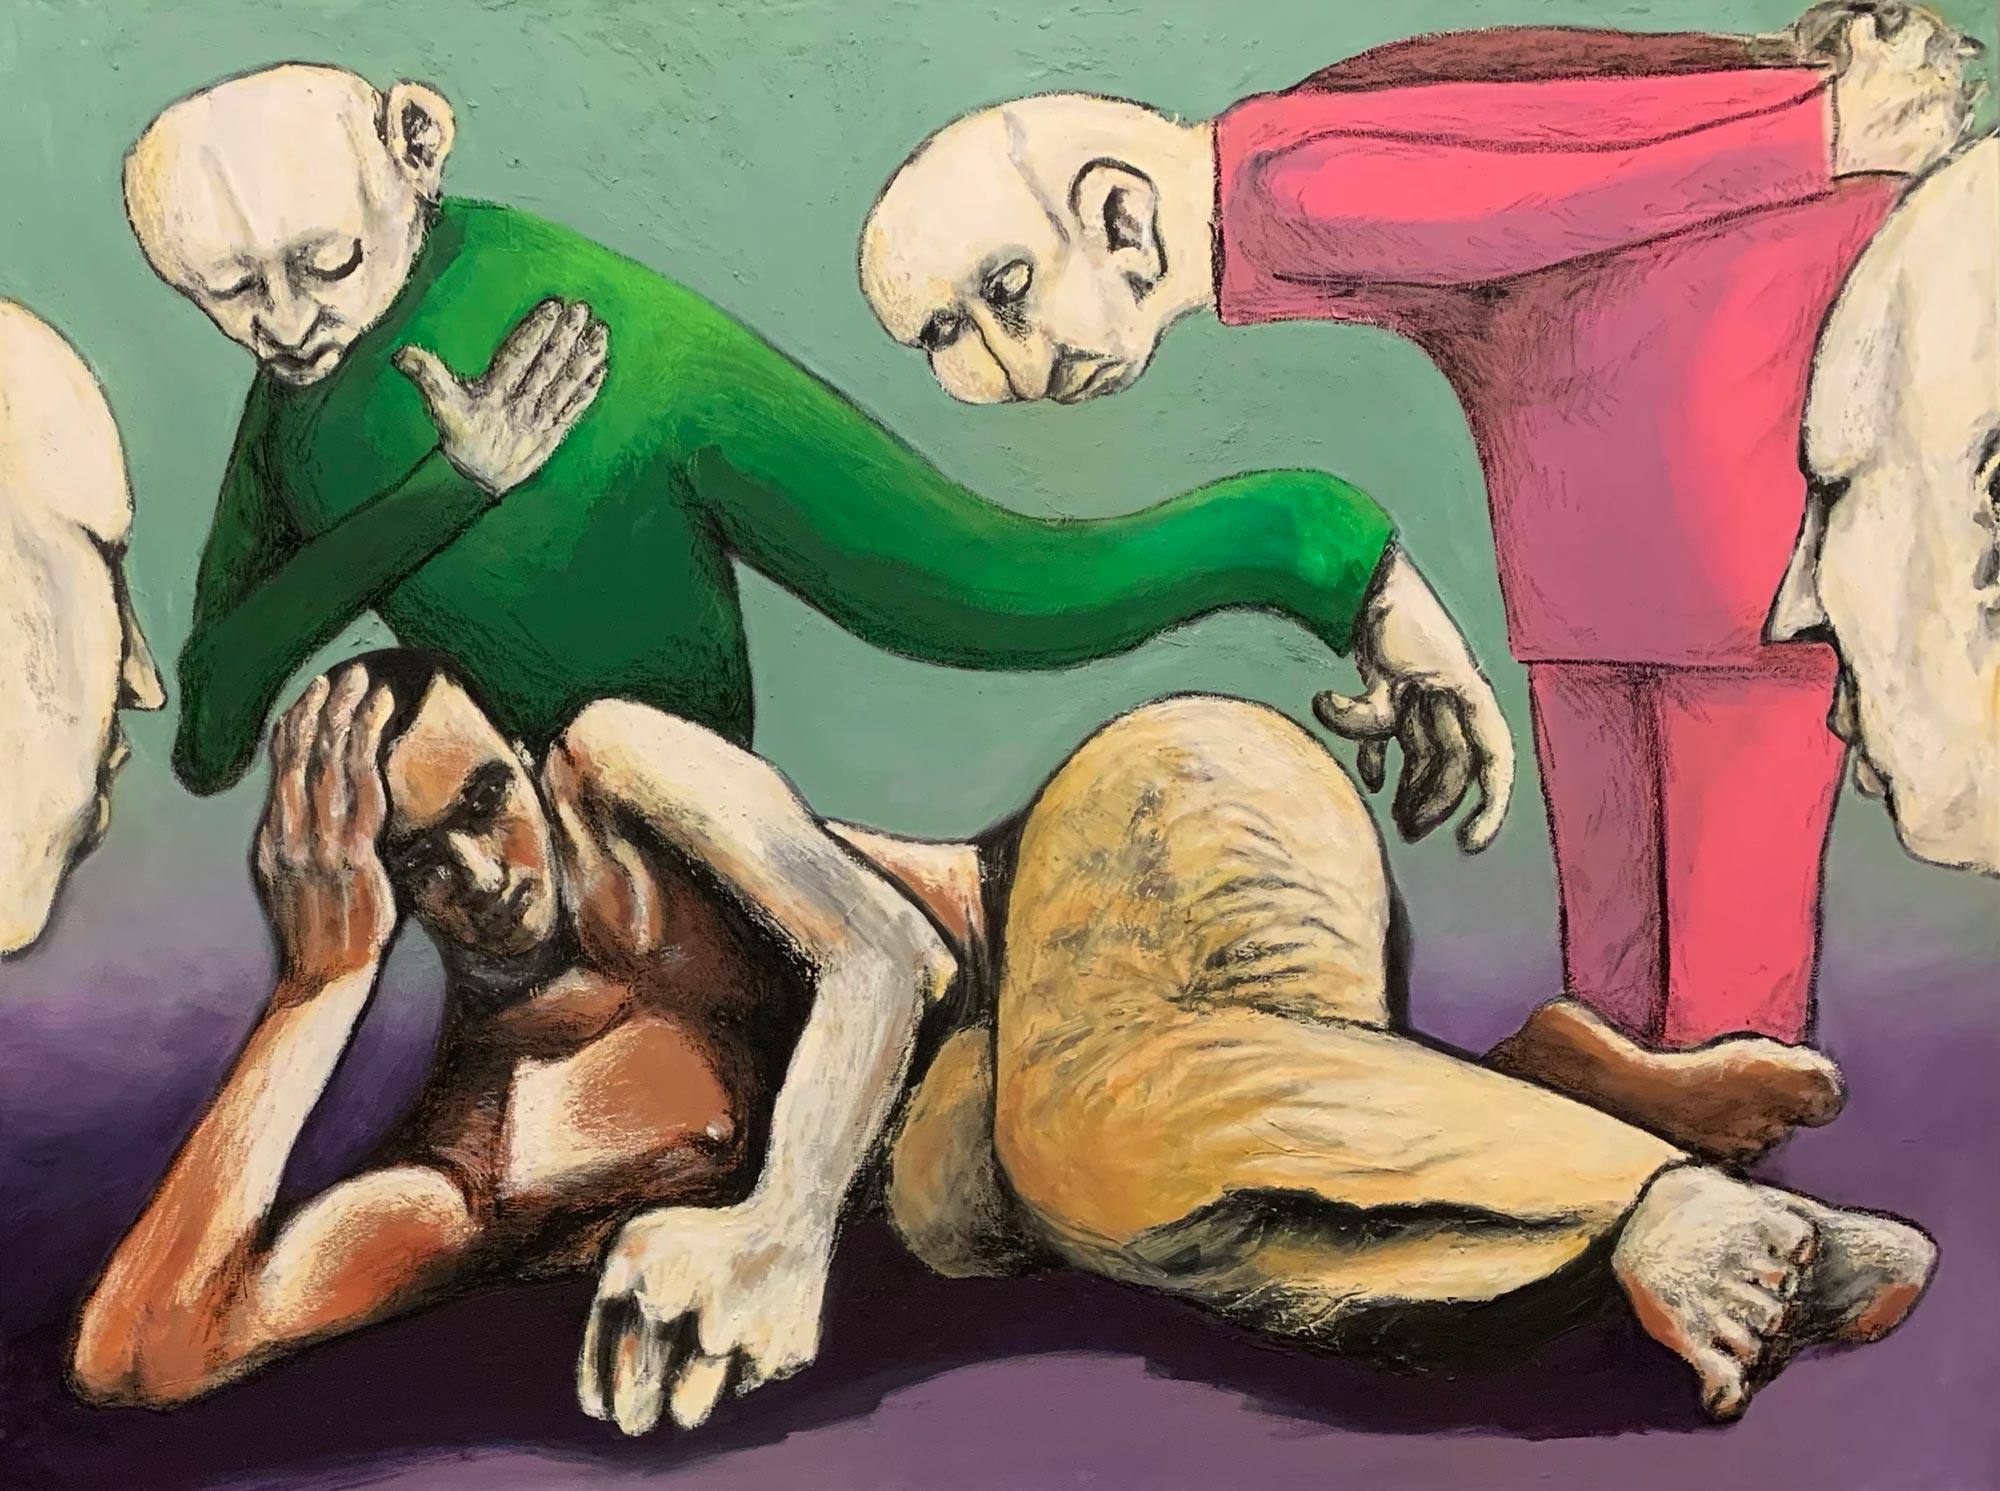 A painting of three figures